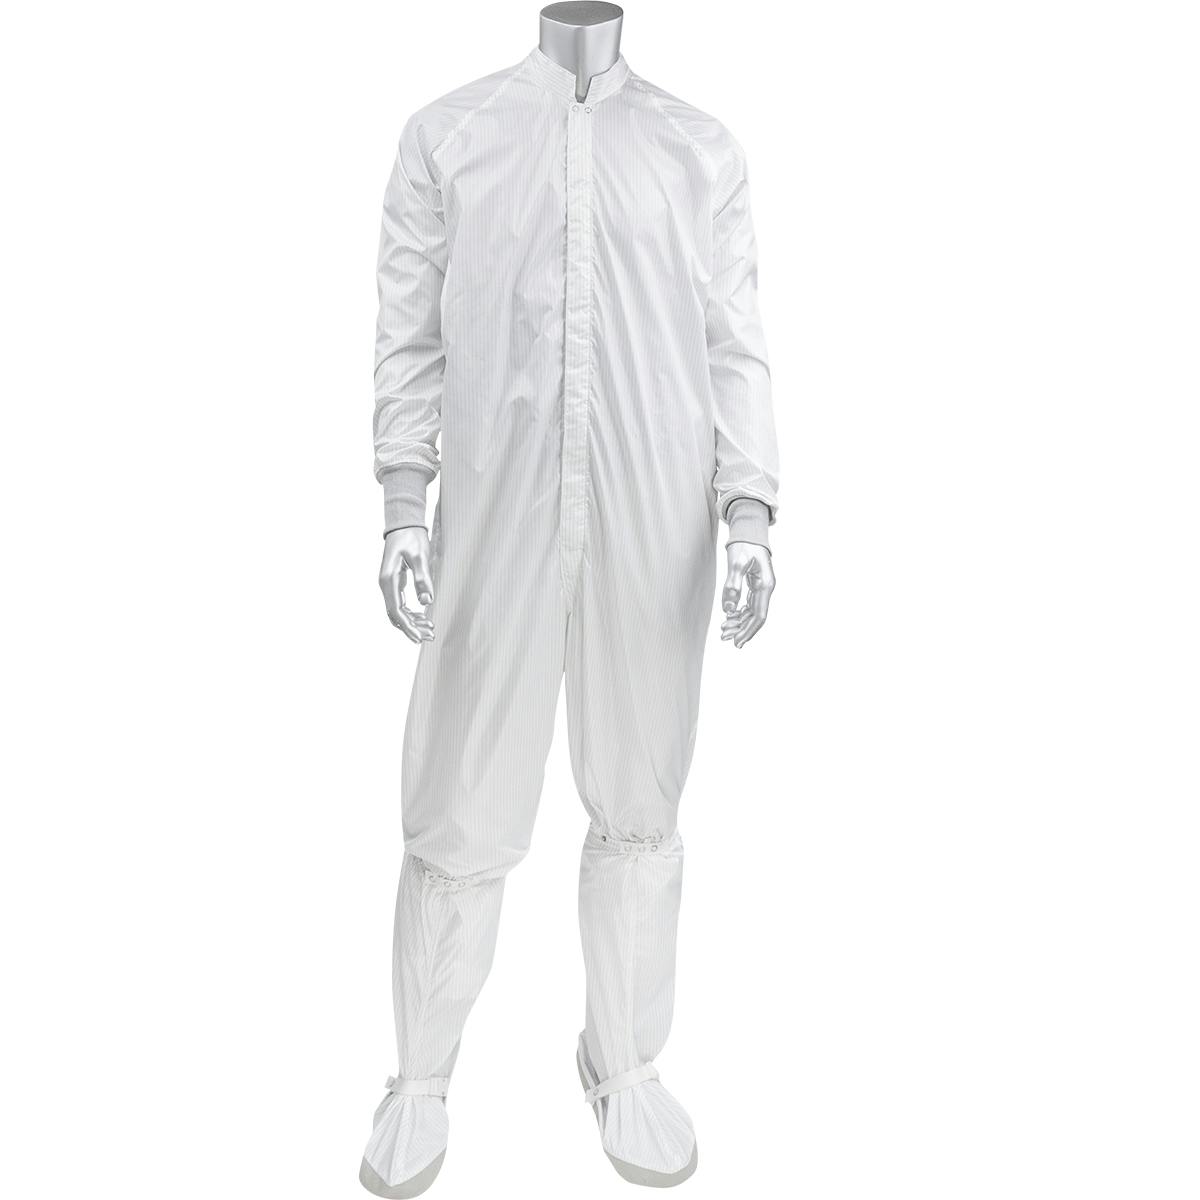 Ultimax Stripe ISO 3 (Class 1) Cleanroom Coverall, White (CC1245-16WH)